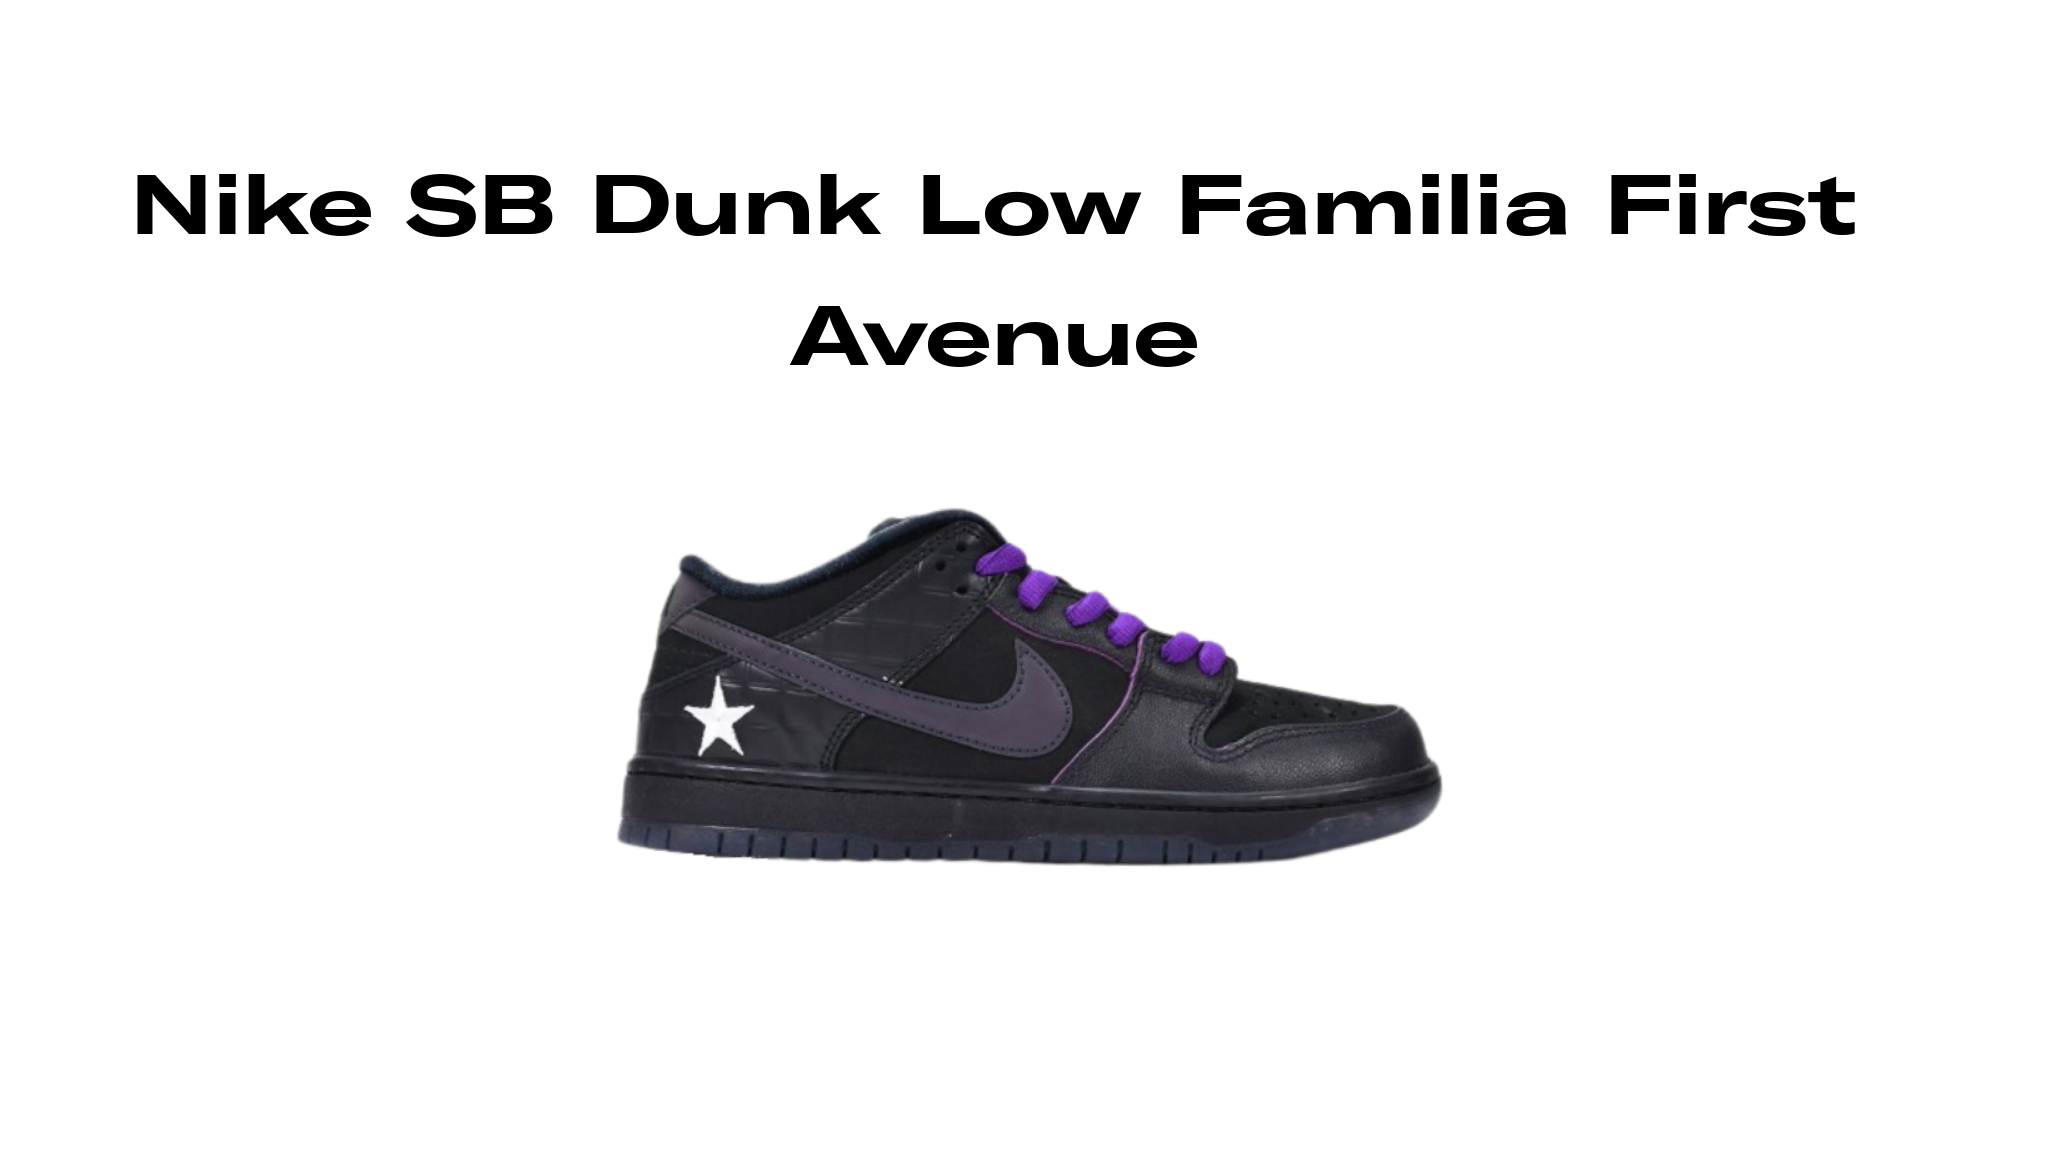 Nike SB Dunk Low Familia First Avenue, Raffles and Release Date 